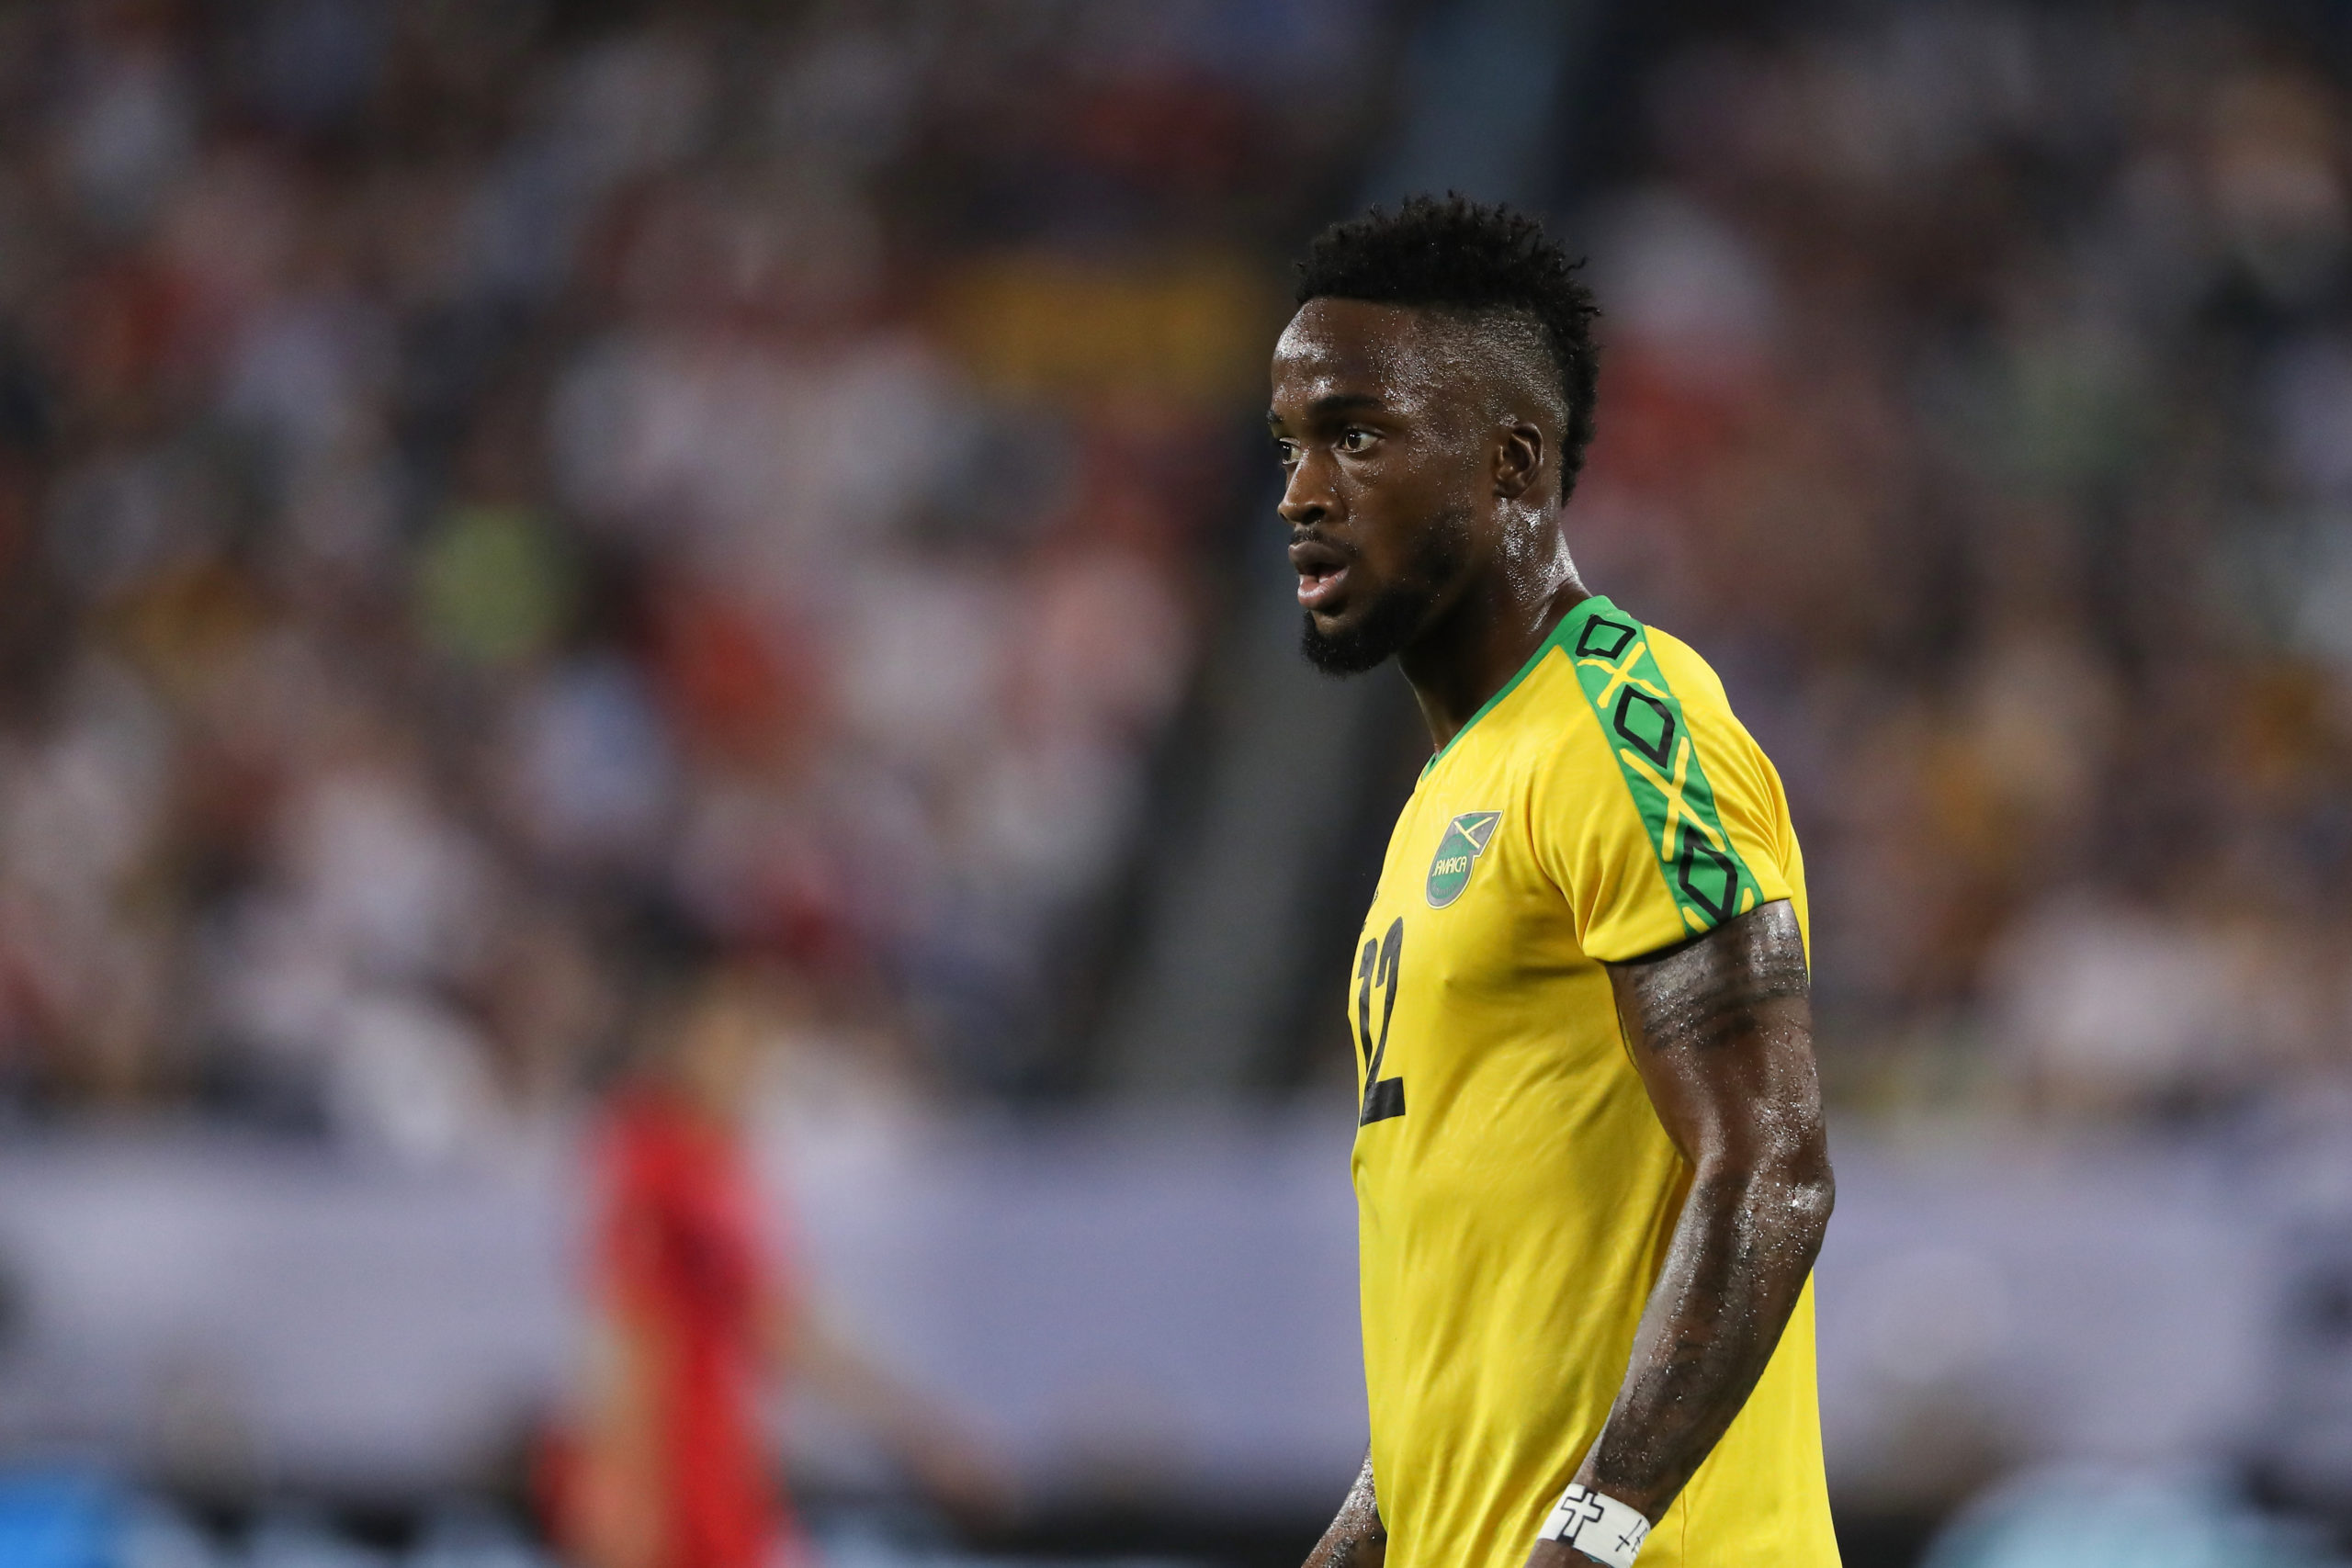 Junior Flemmings of Jamaica during the 2019 CONCACAF Gold Cup Semi Final between Jamaica and United States